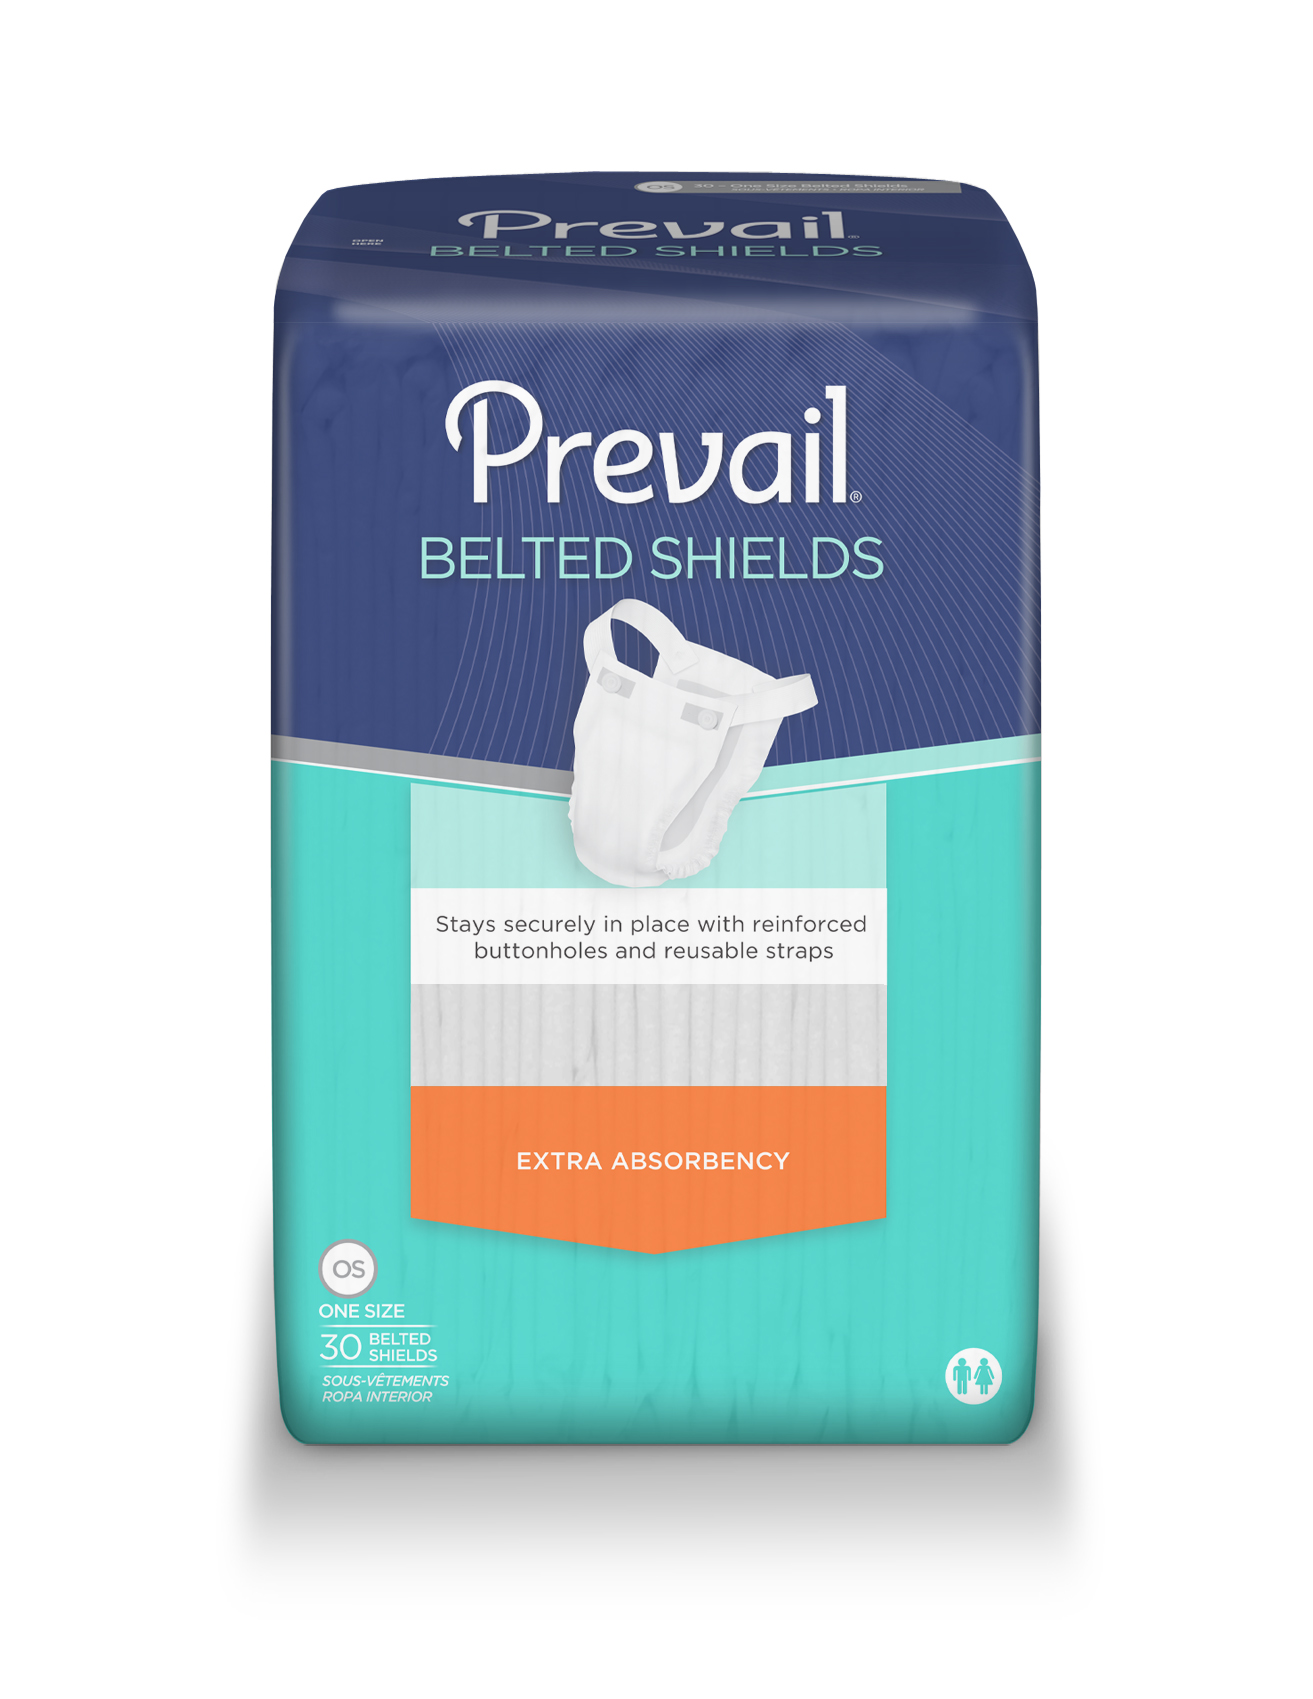 Prevail Belted Shield